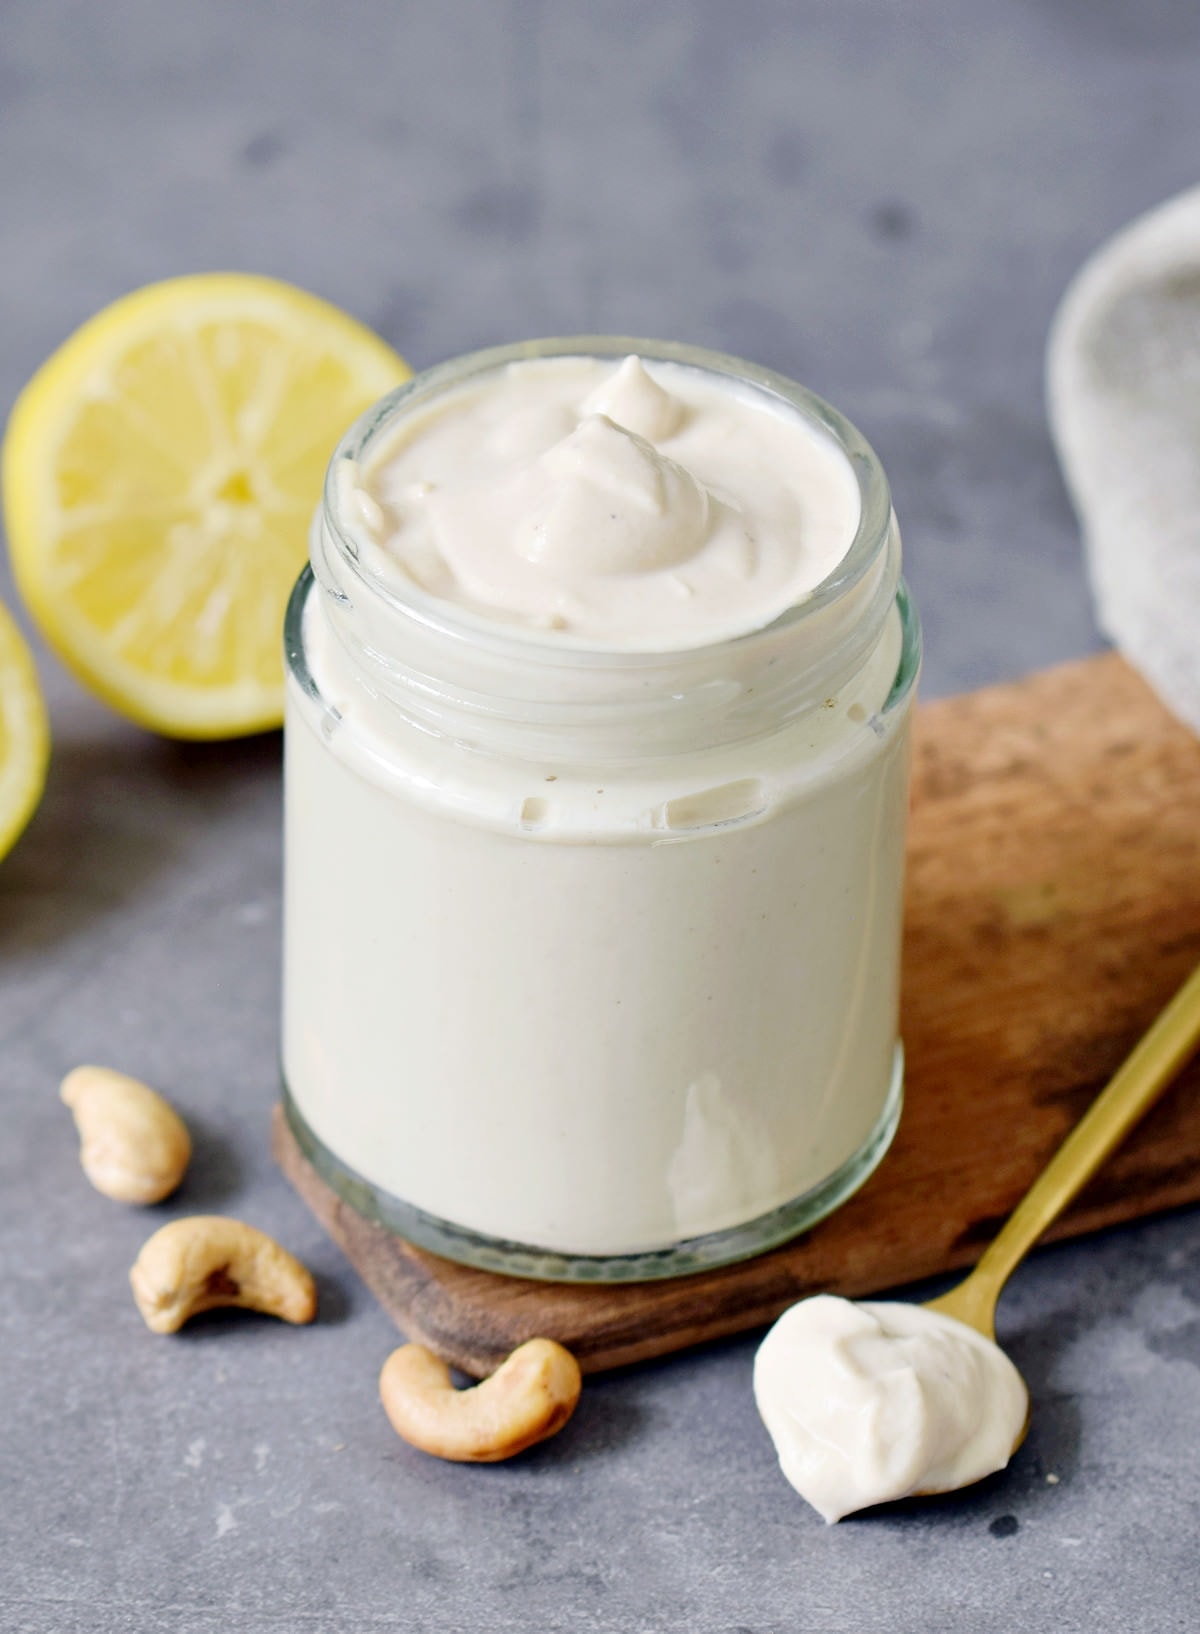 vegan sour cream in a jar with cashews and lemon